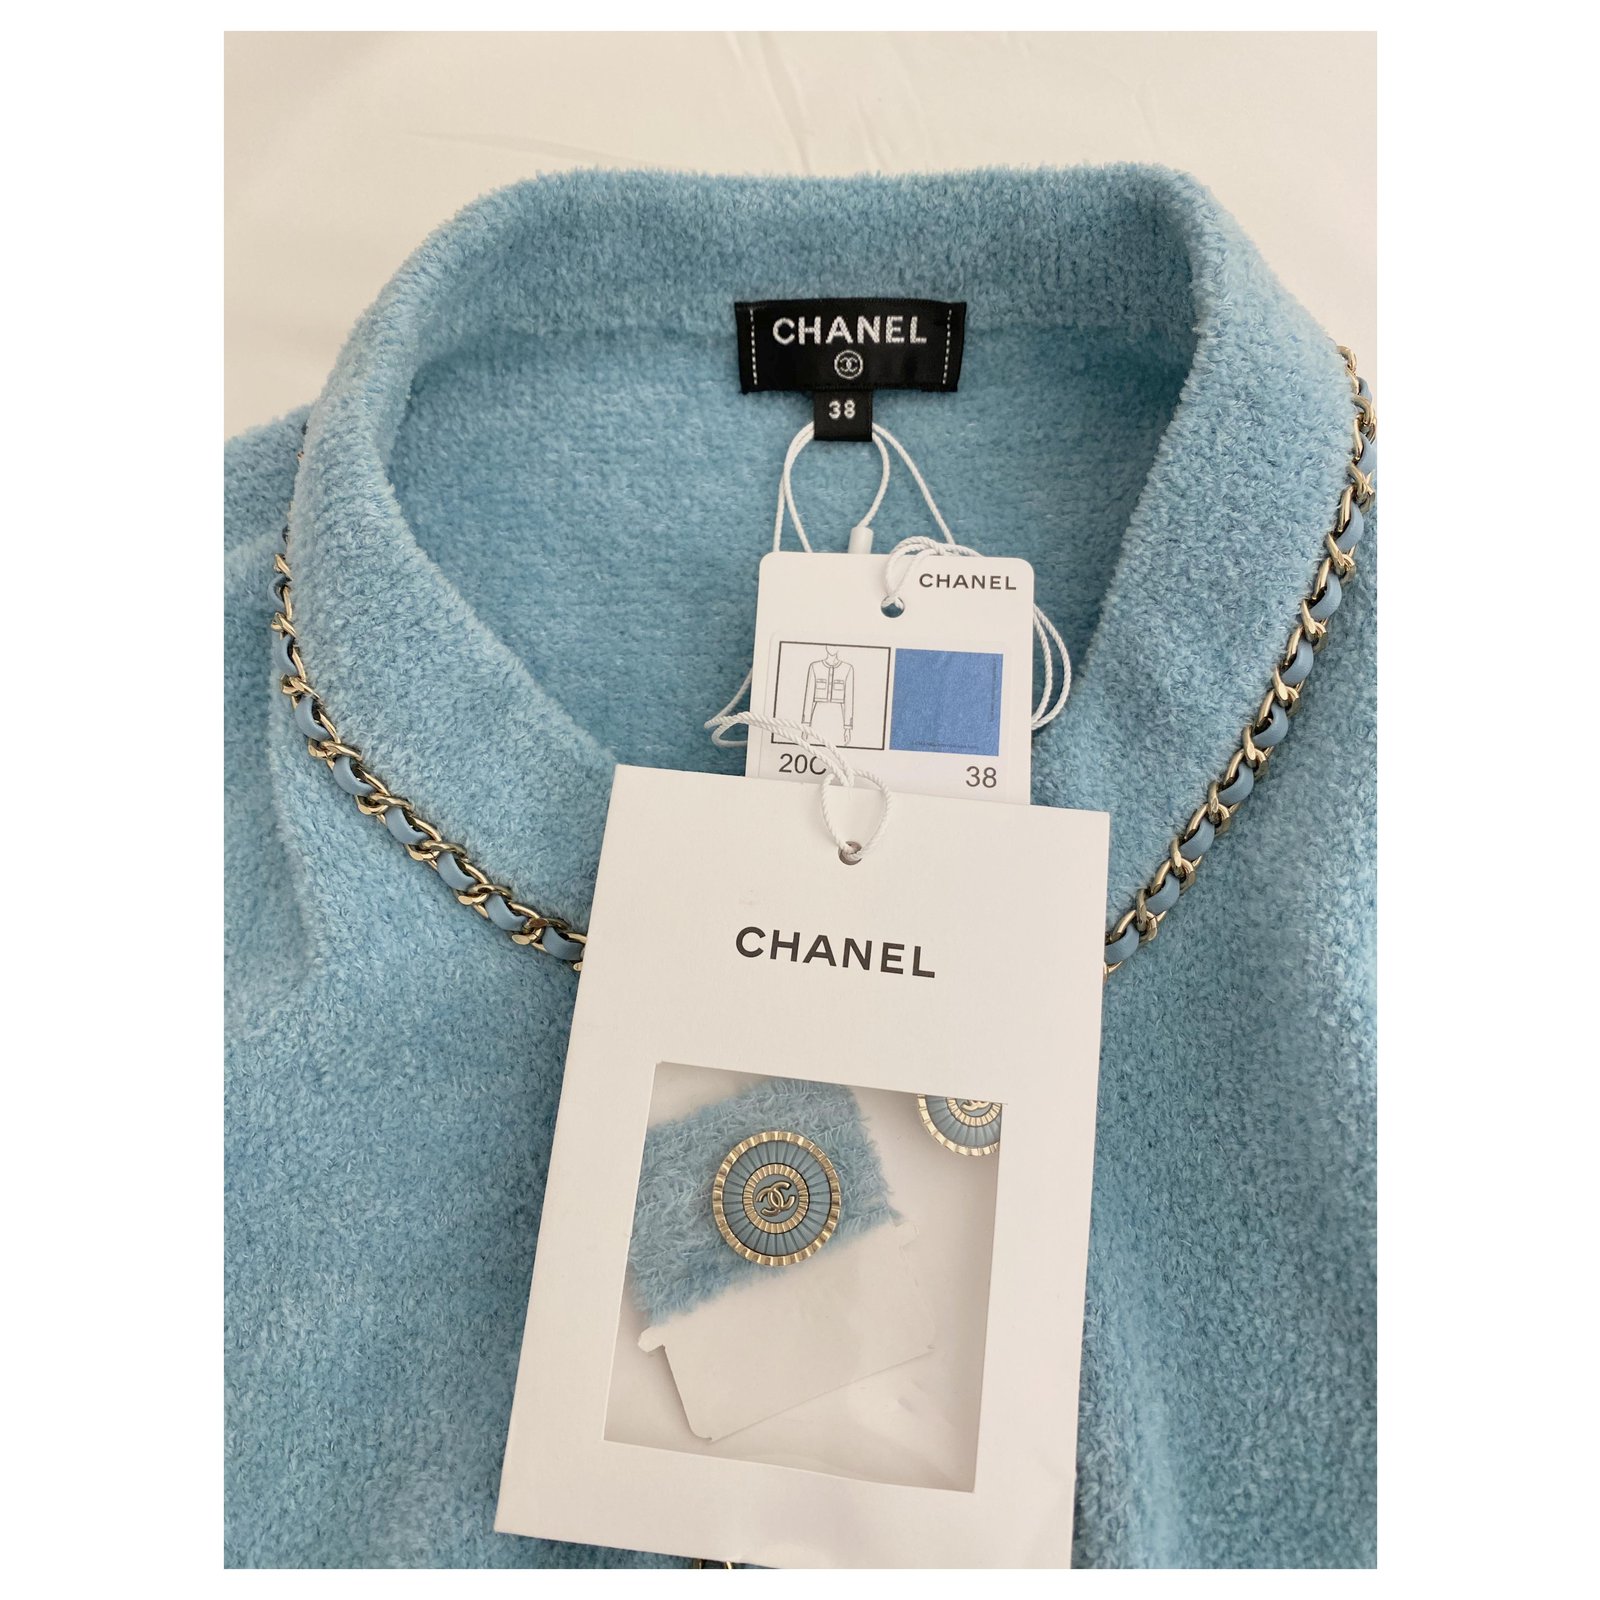 Chanel 2020 Cruise 20C Sky Blue leather chain jacket